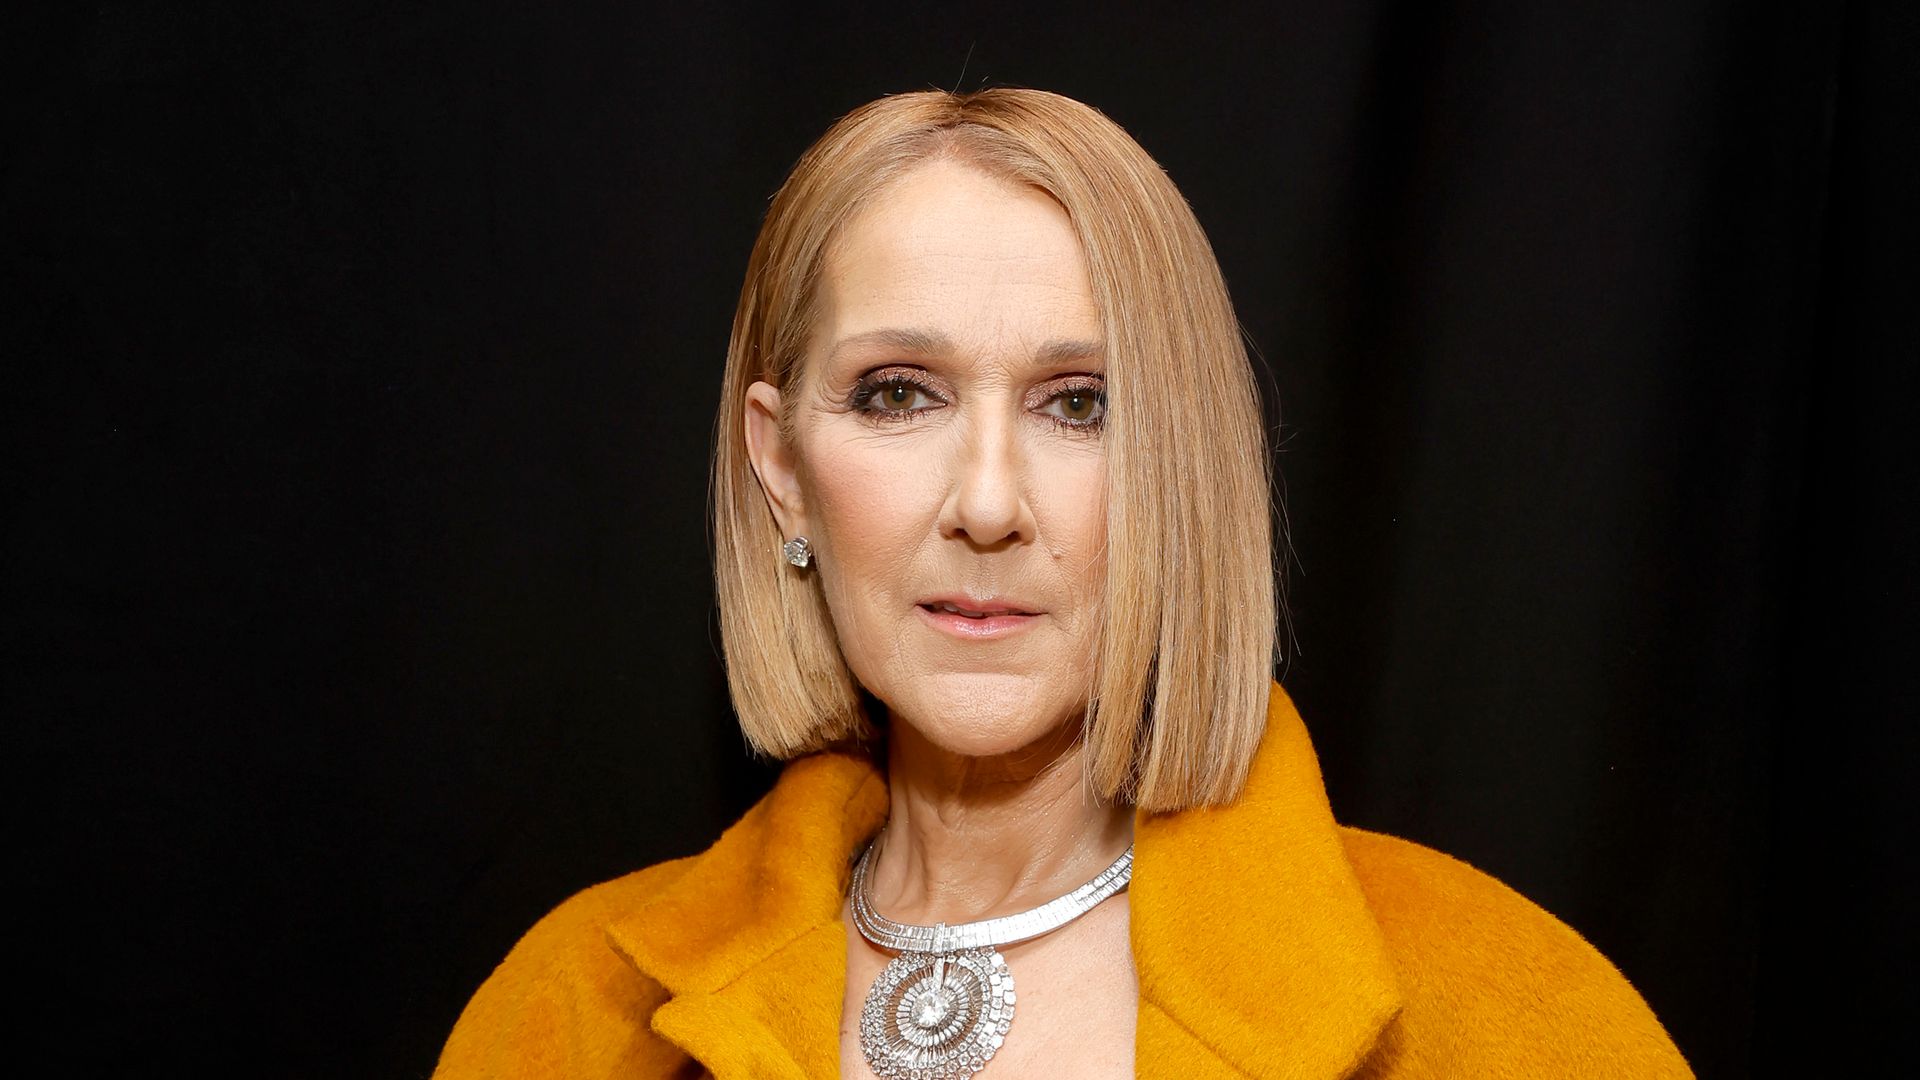 Celine Dion's powerful new photo from family home sparks fan response ahead of major comeback